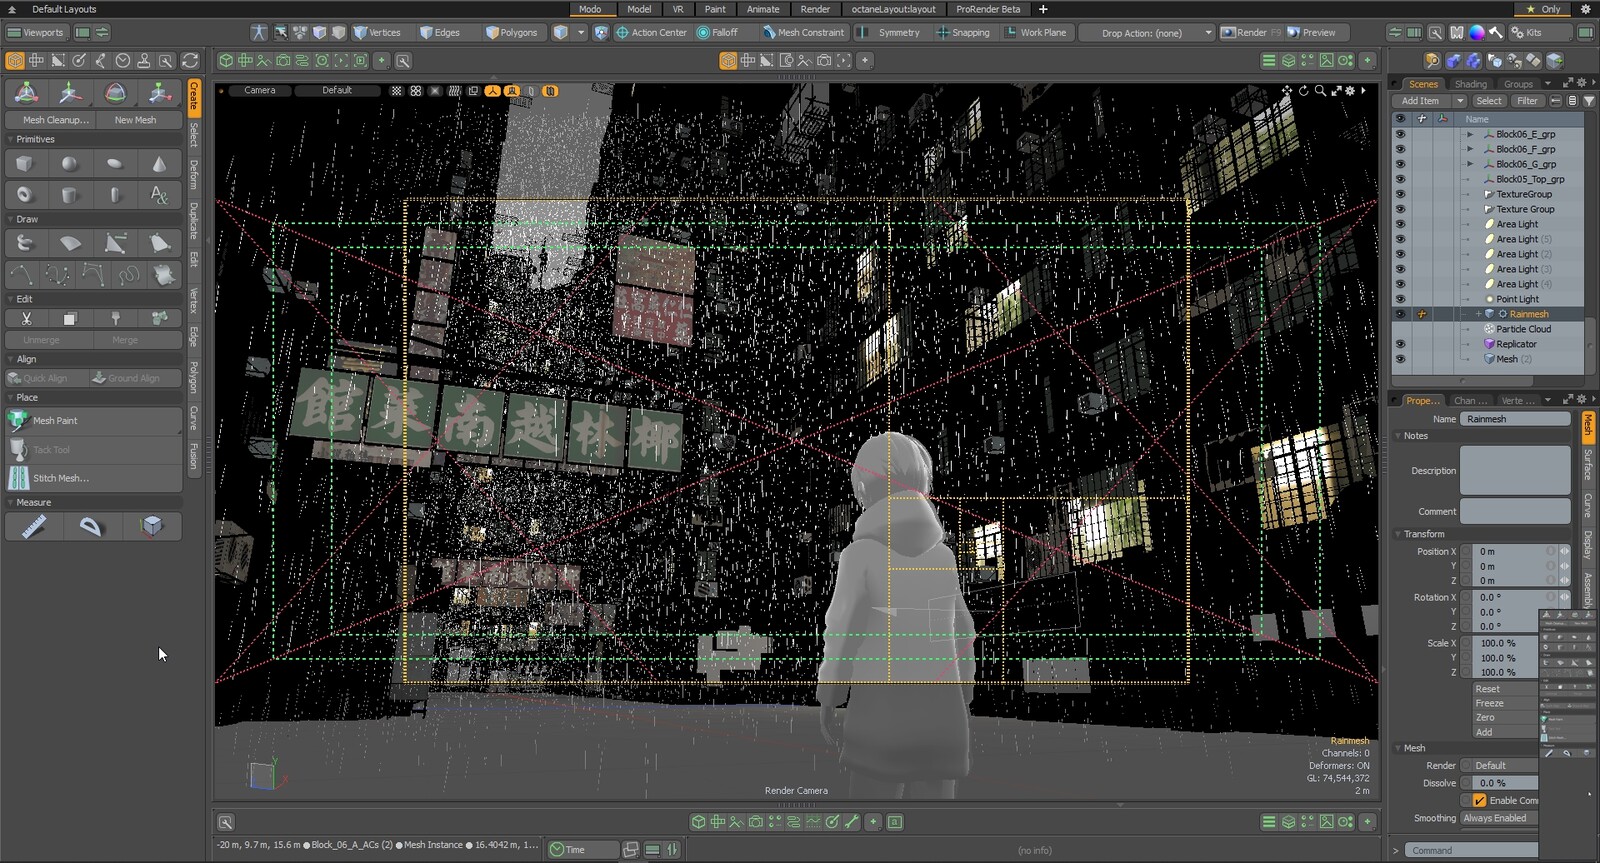 Modo scene file. Note the rain was done fully in 3D using a particle system.